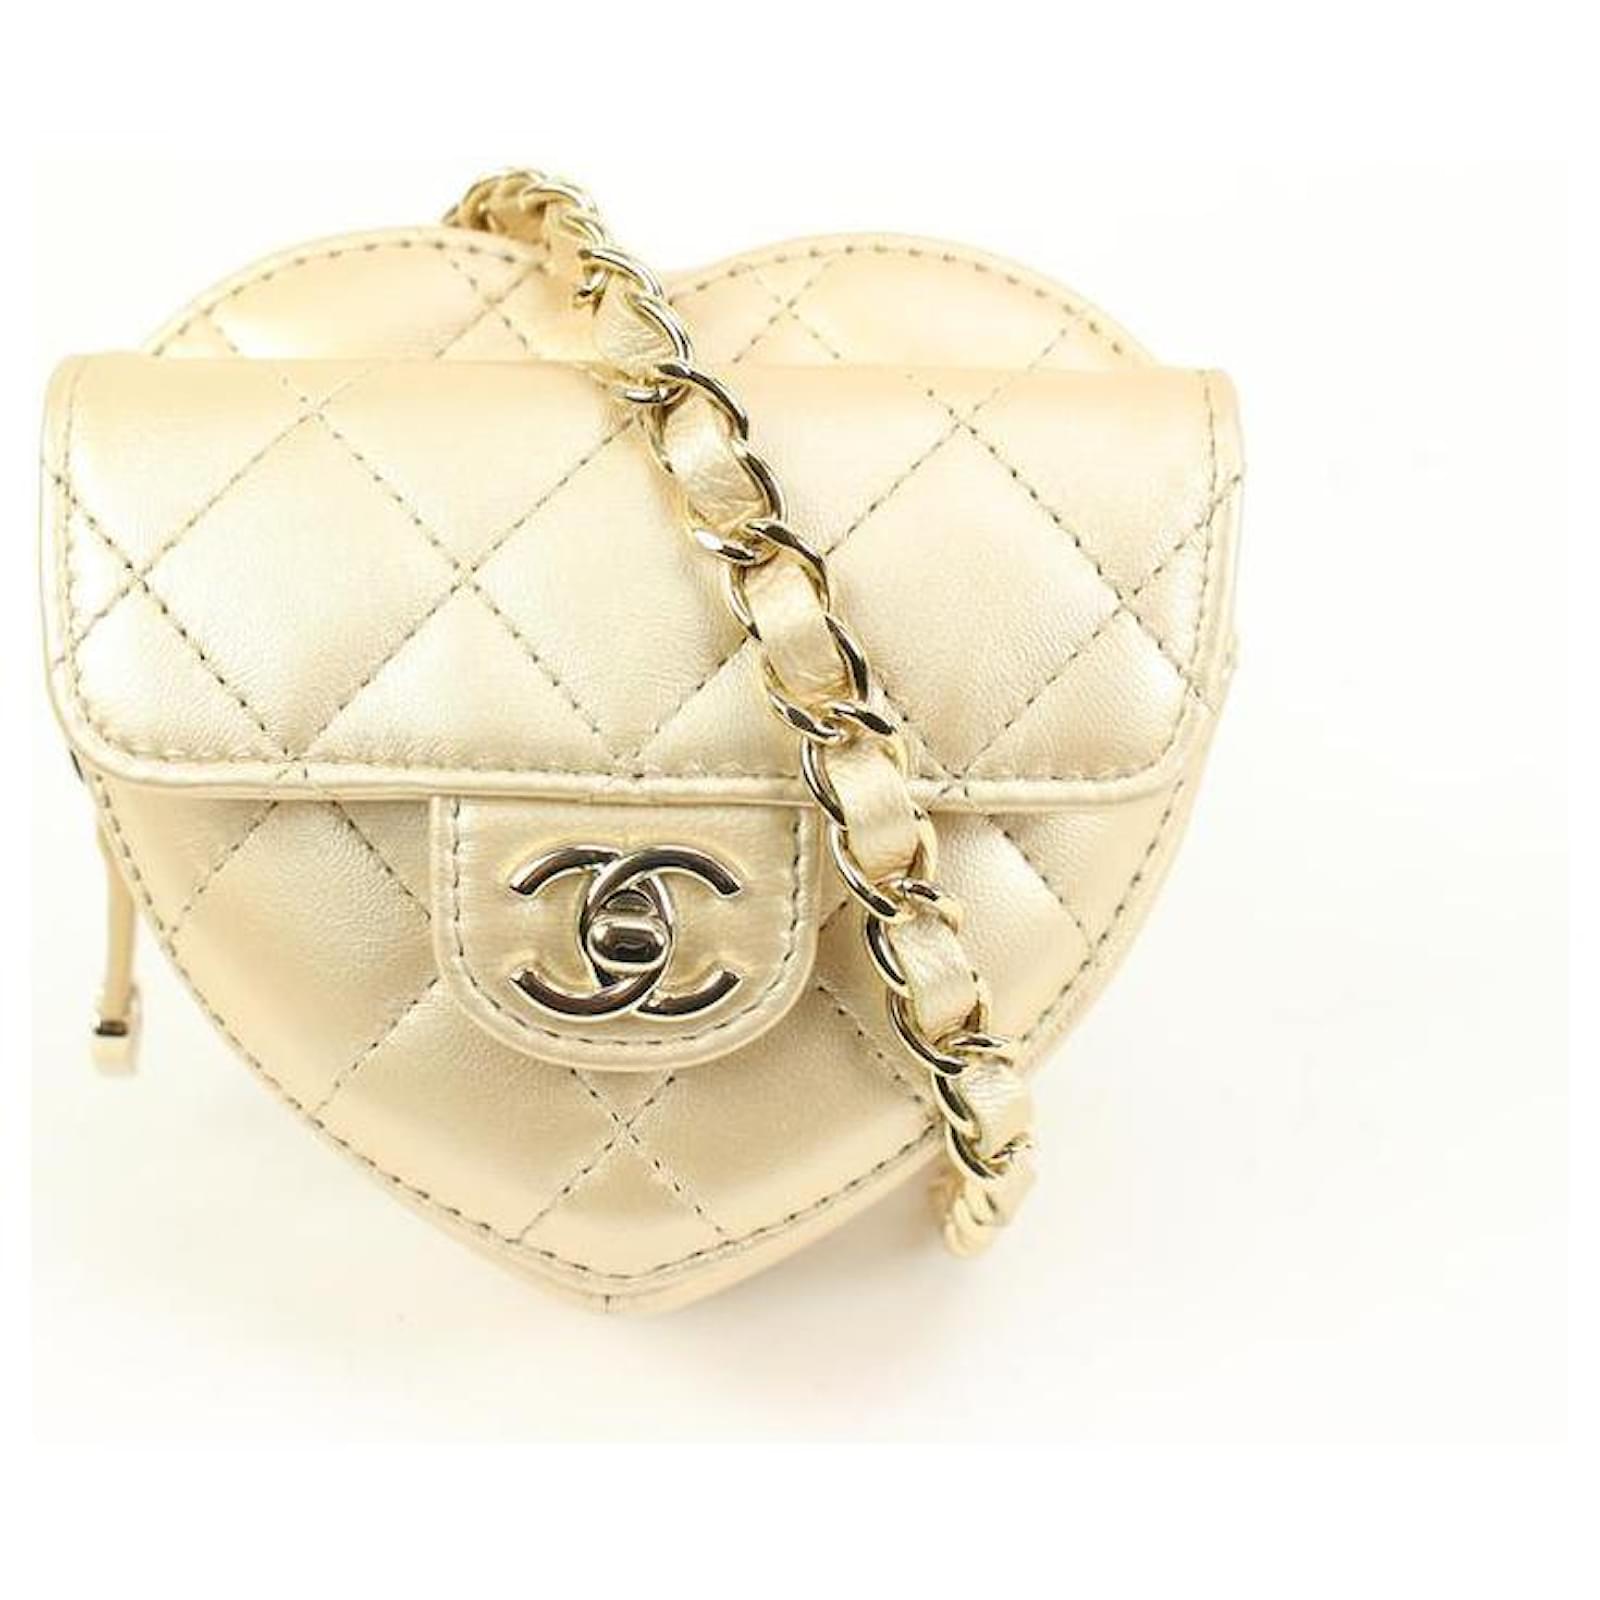 Chanel White Leather Mini CC In Love Heart Chain Shoulder Bag Chanel